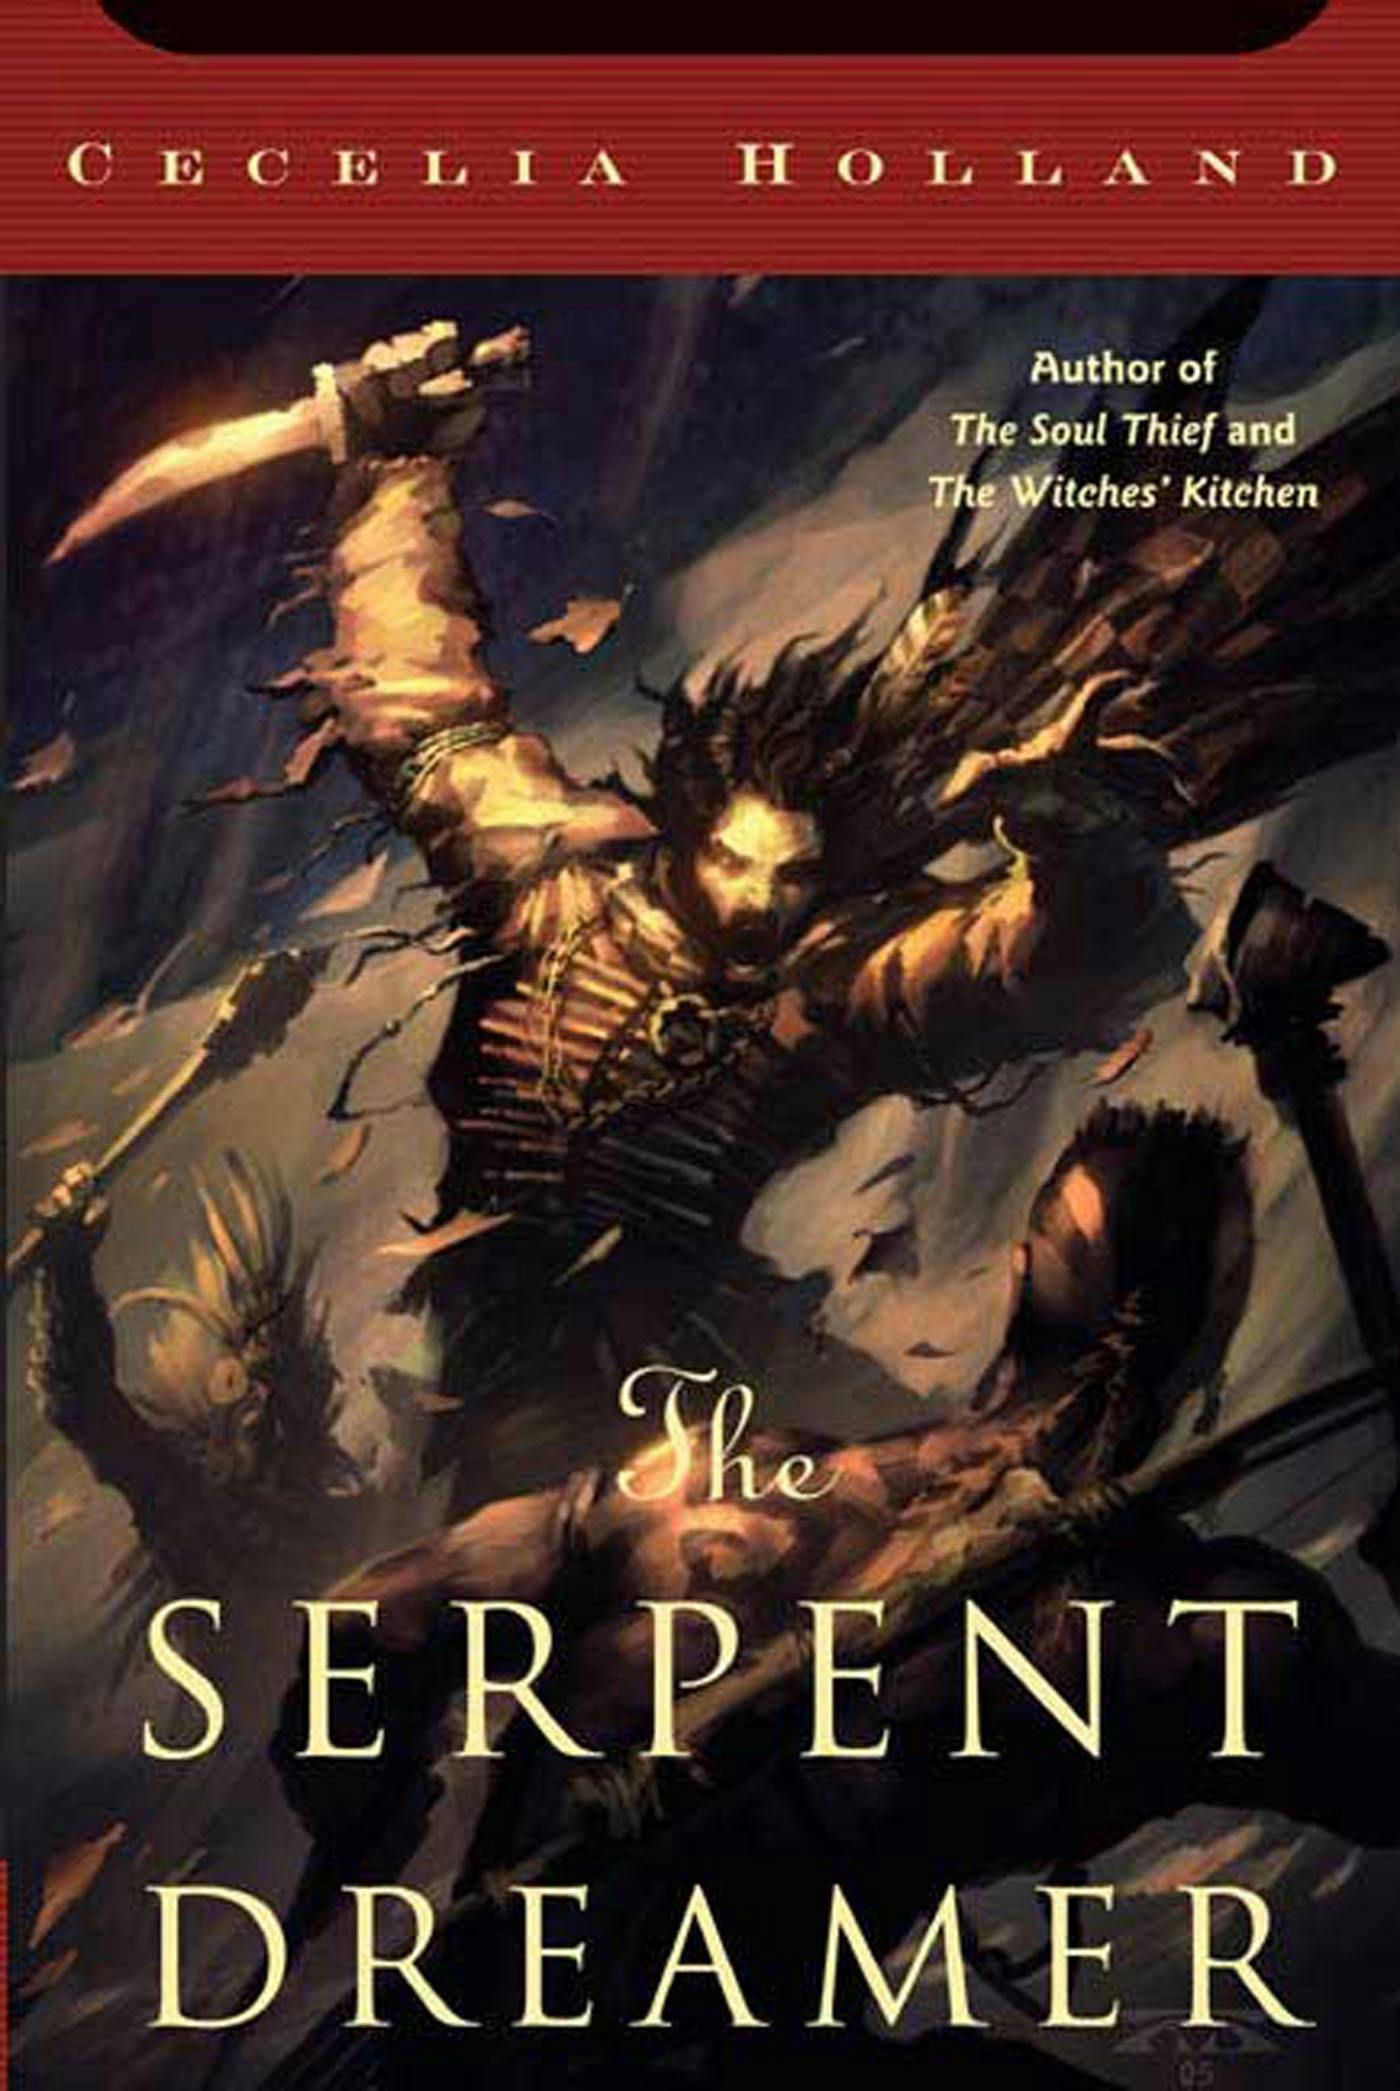 Cover for the book titled as: The Serpent Dreamer